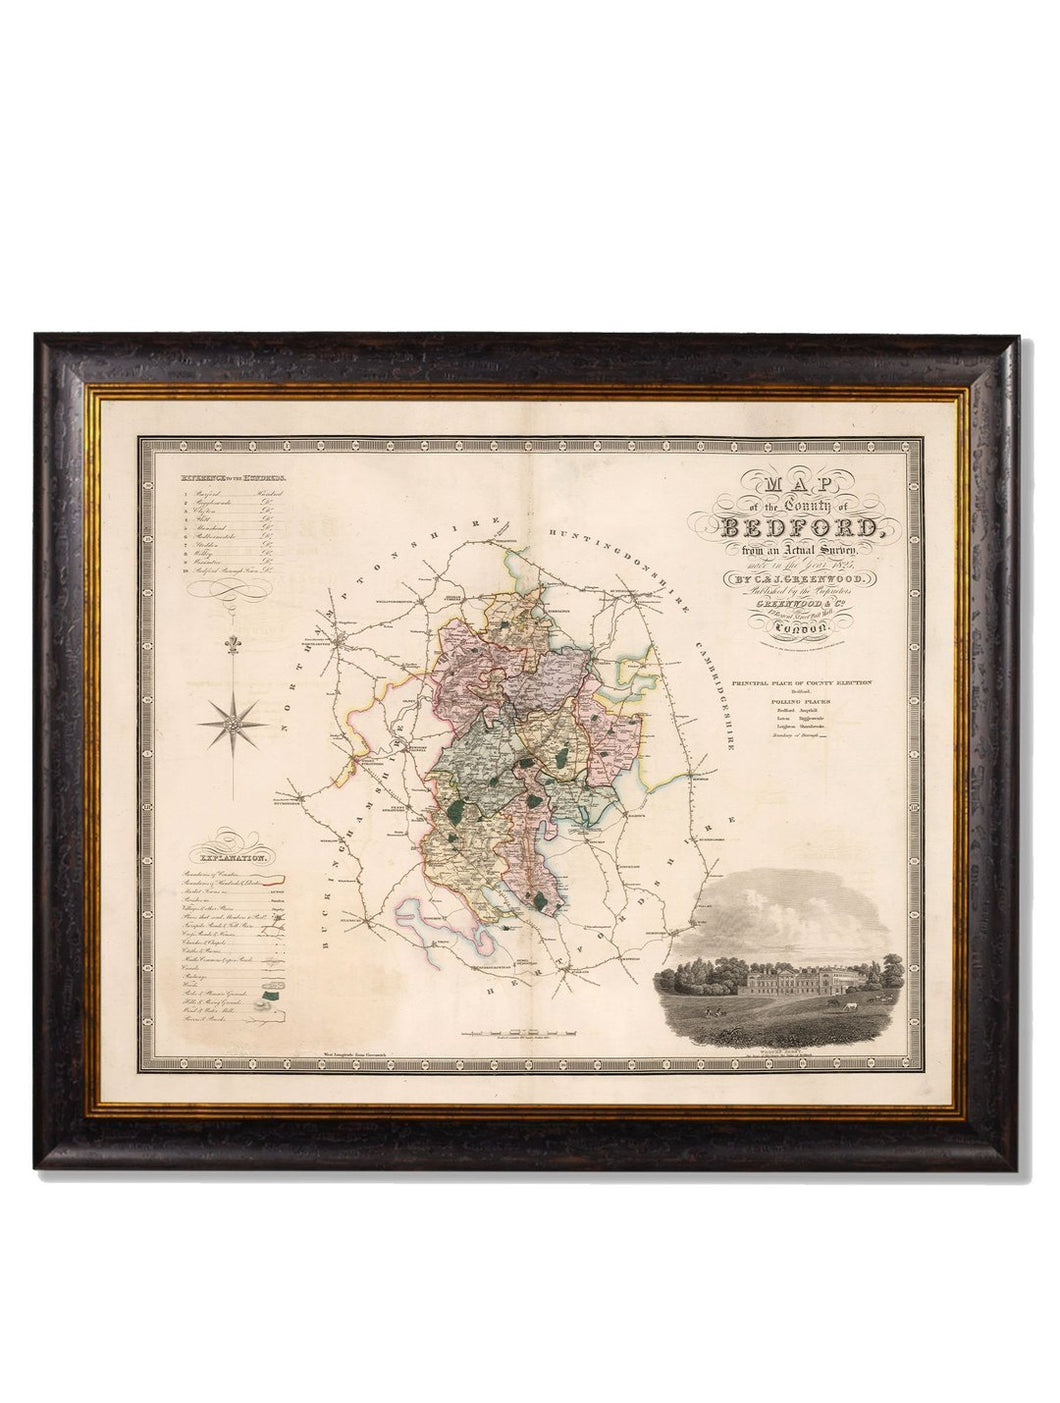 Framed County Maps of England Prints - Referenced From an Original 1800s MapVintage FrogPictures & Prints